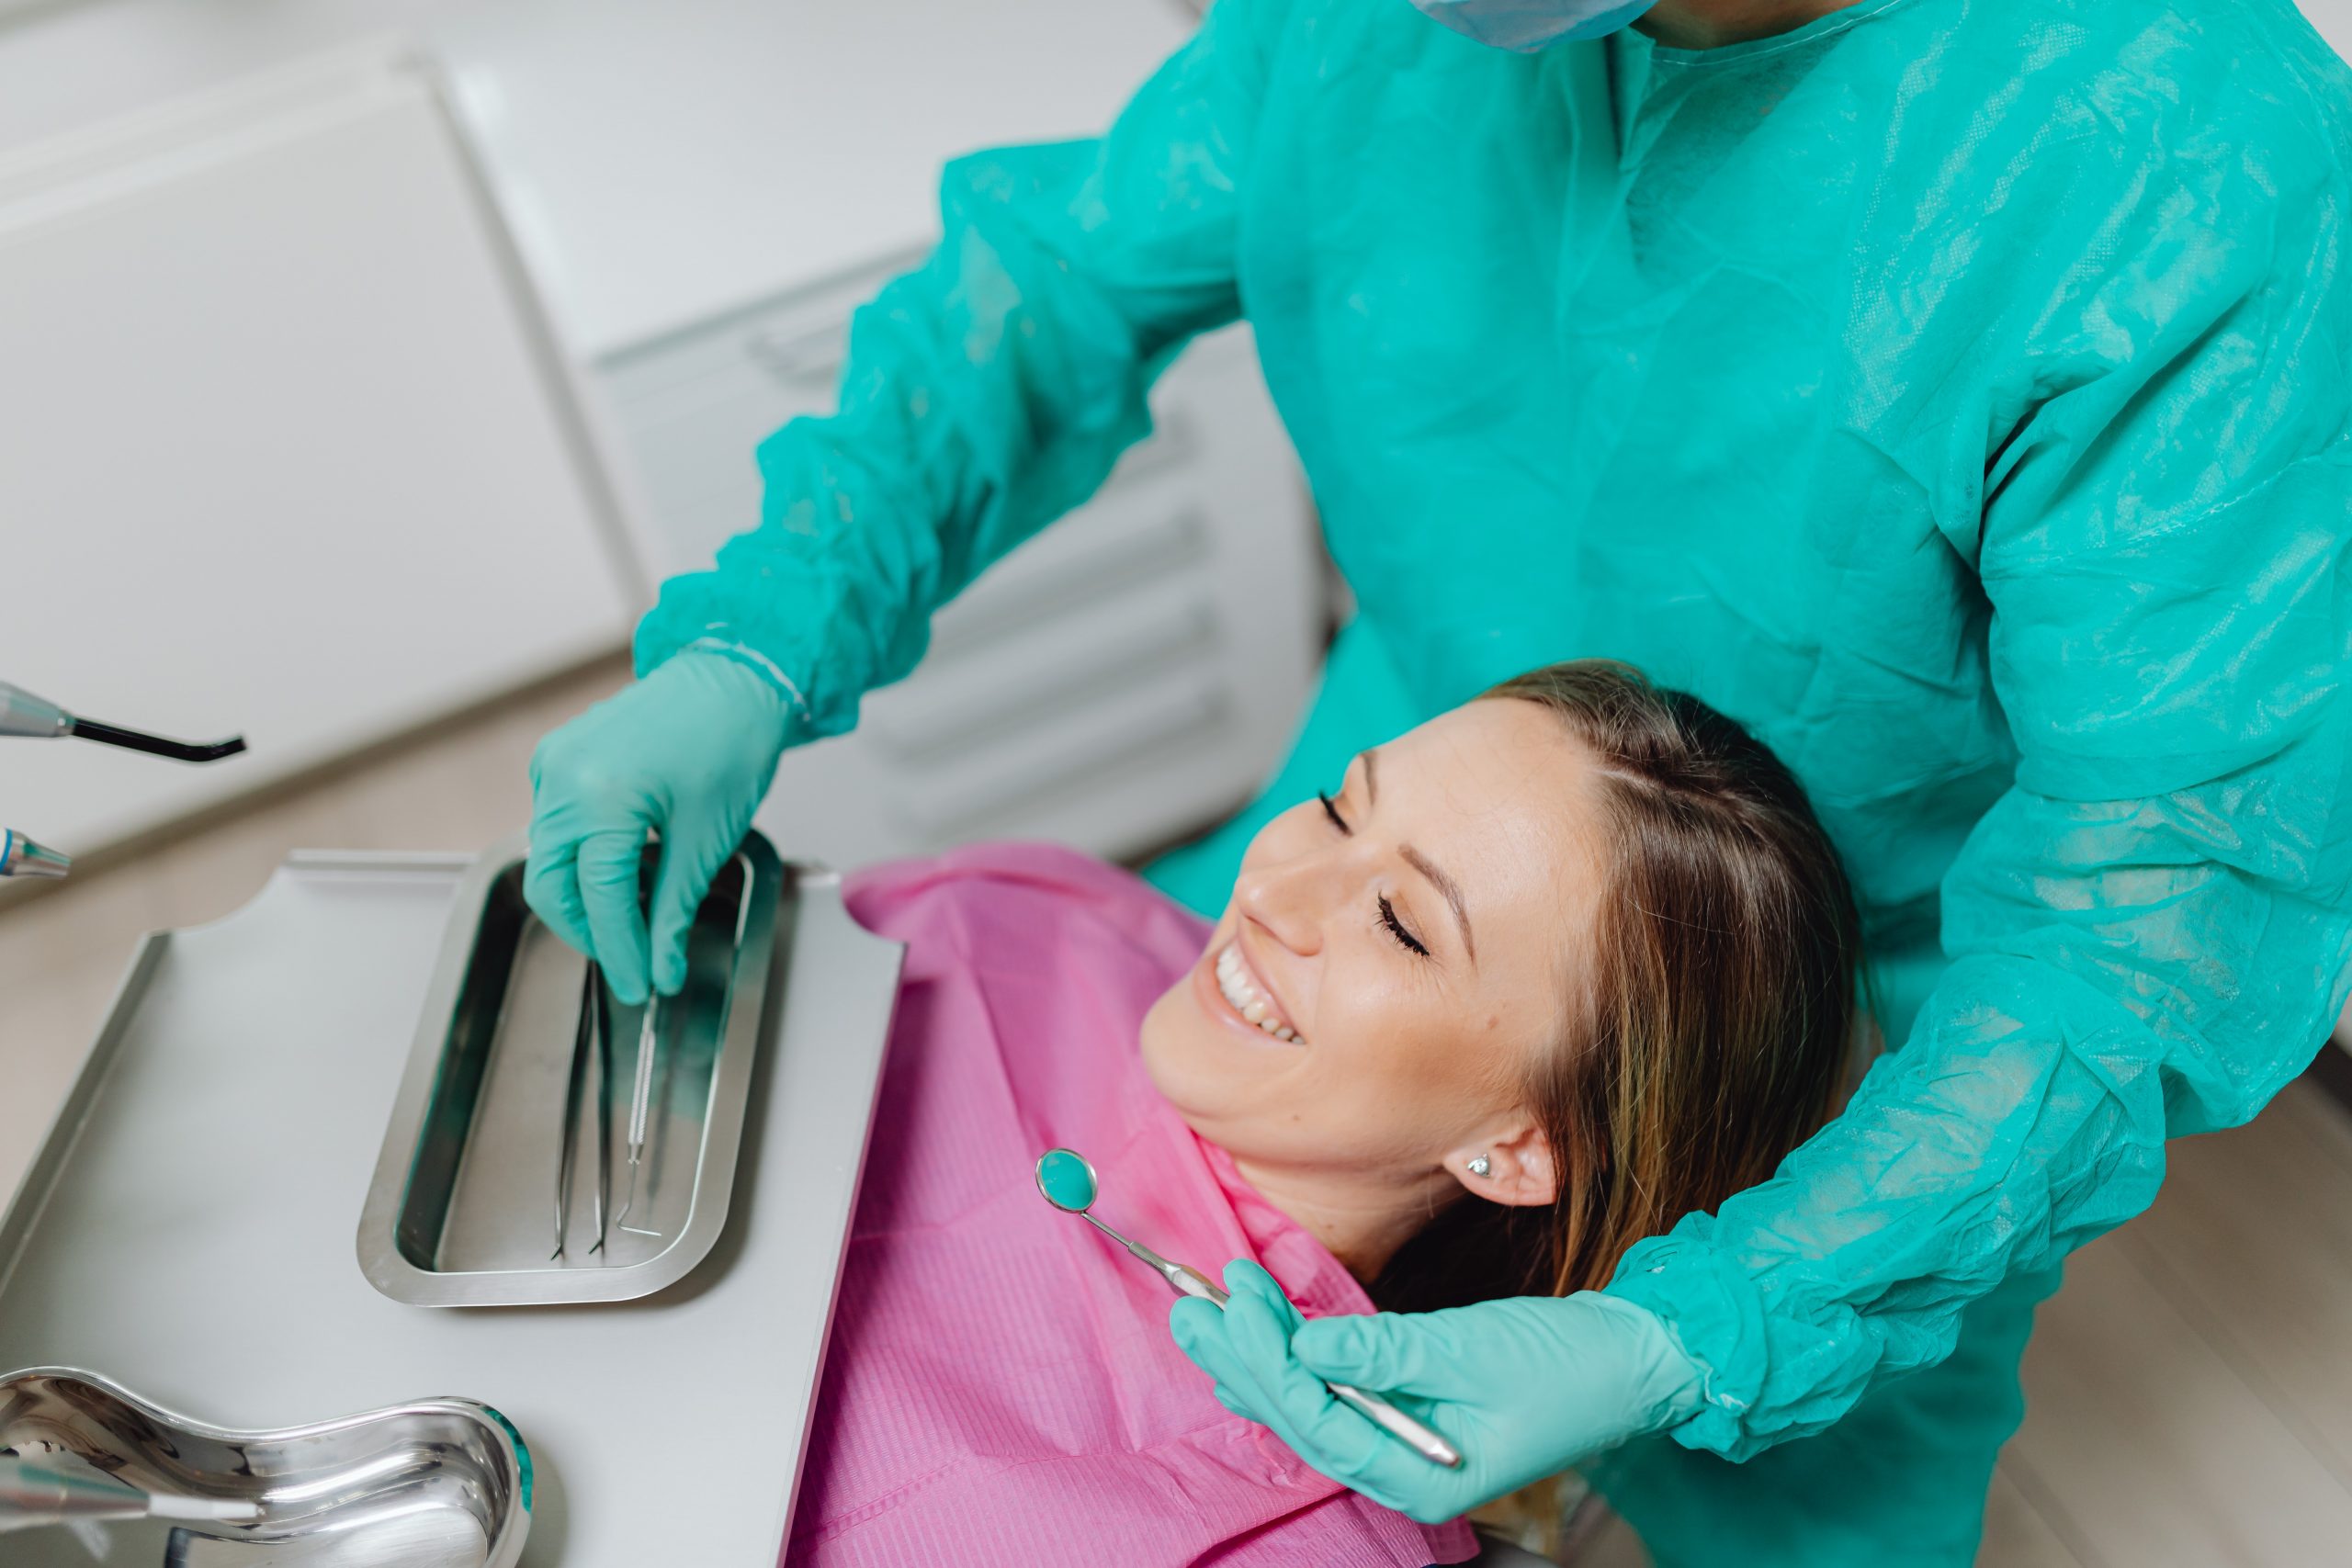 A dentist prepares a patient for cosmetic dentistry, making her feel relaxed.